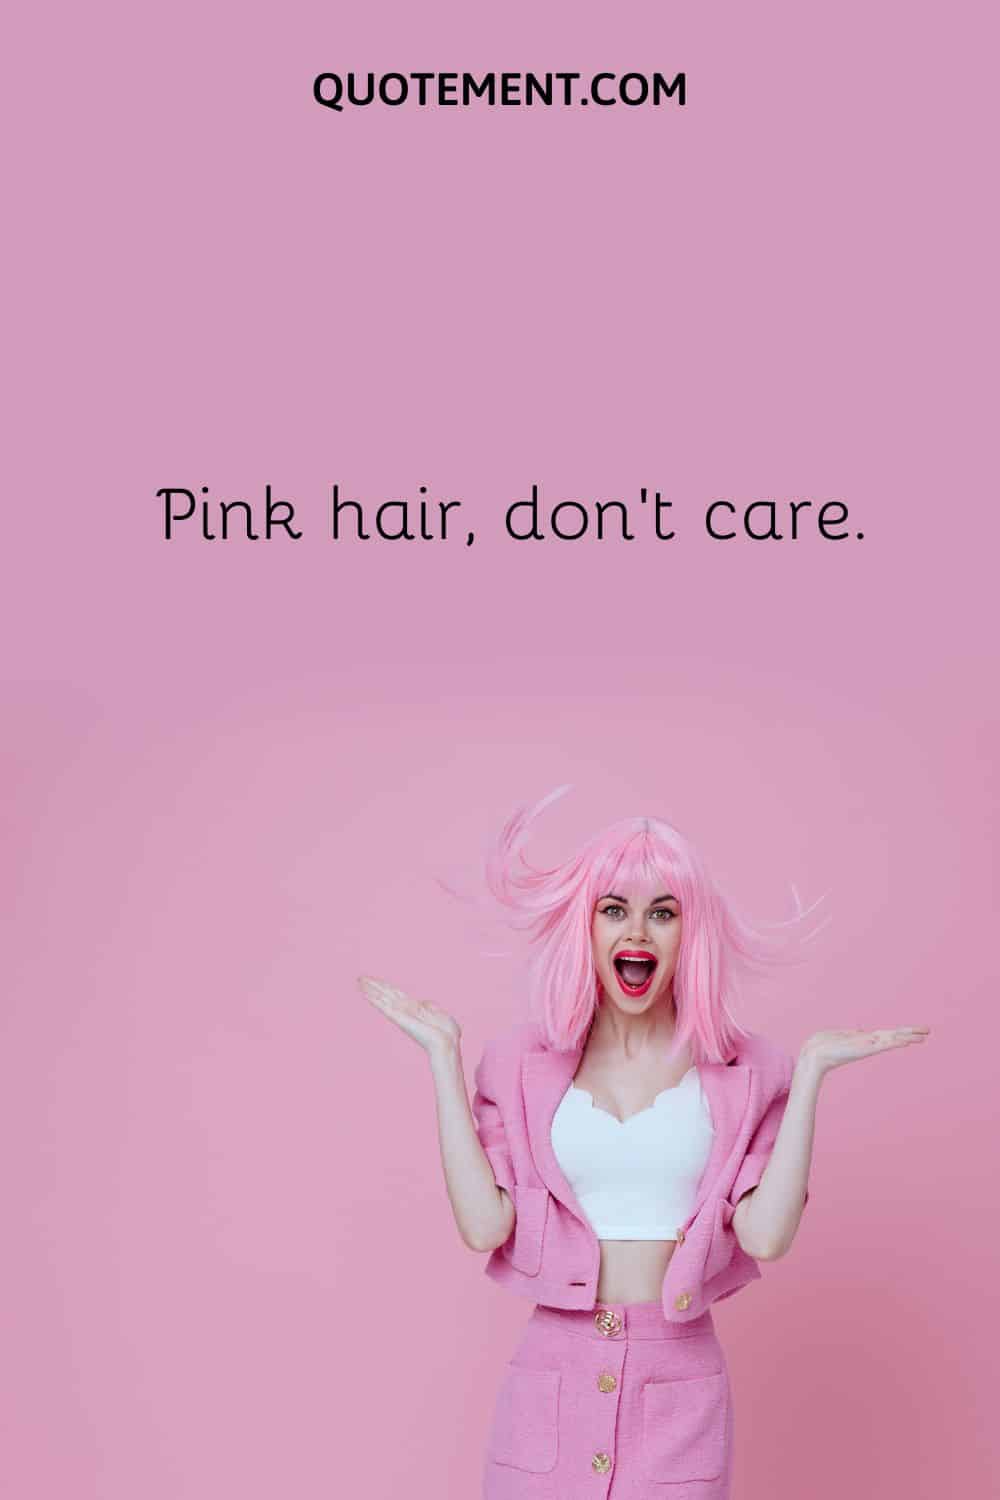 Pink hair, don’t care.
